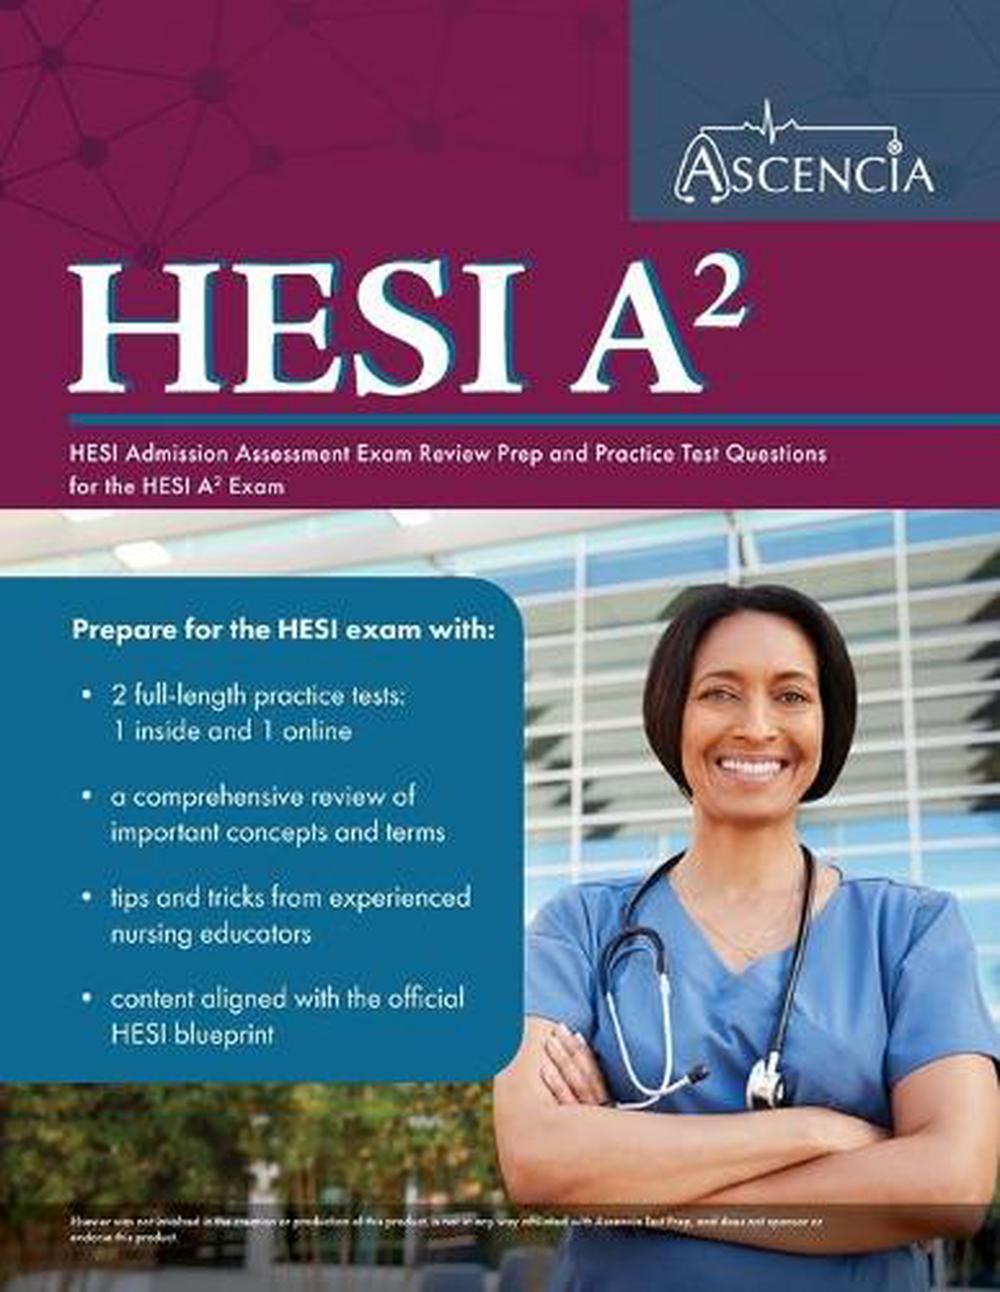 Hesi A2 Study Guide 2020 2021 Hesi Admission Assessment Exam Review